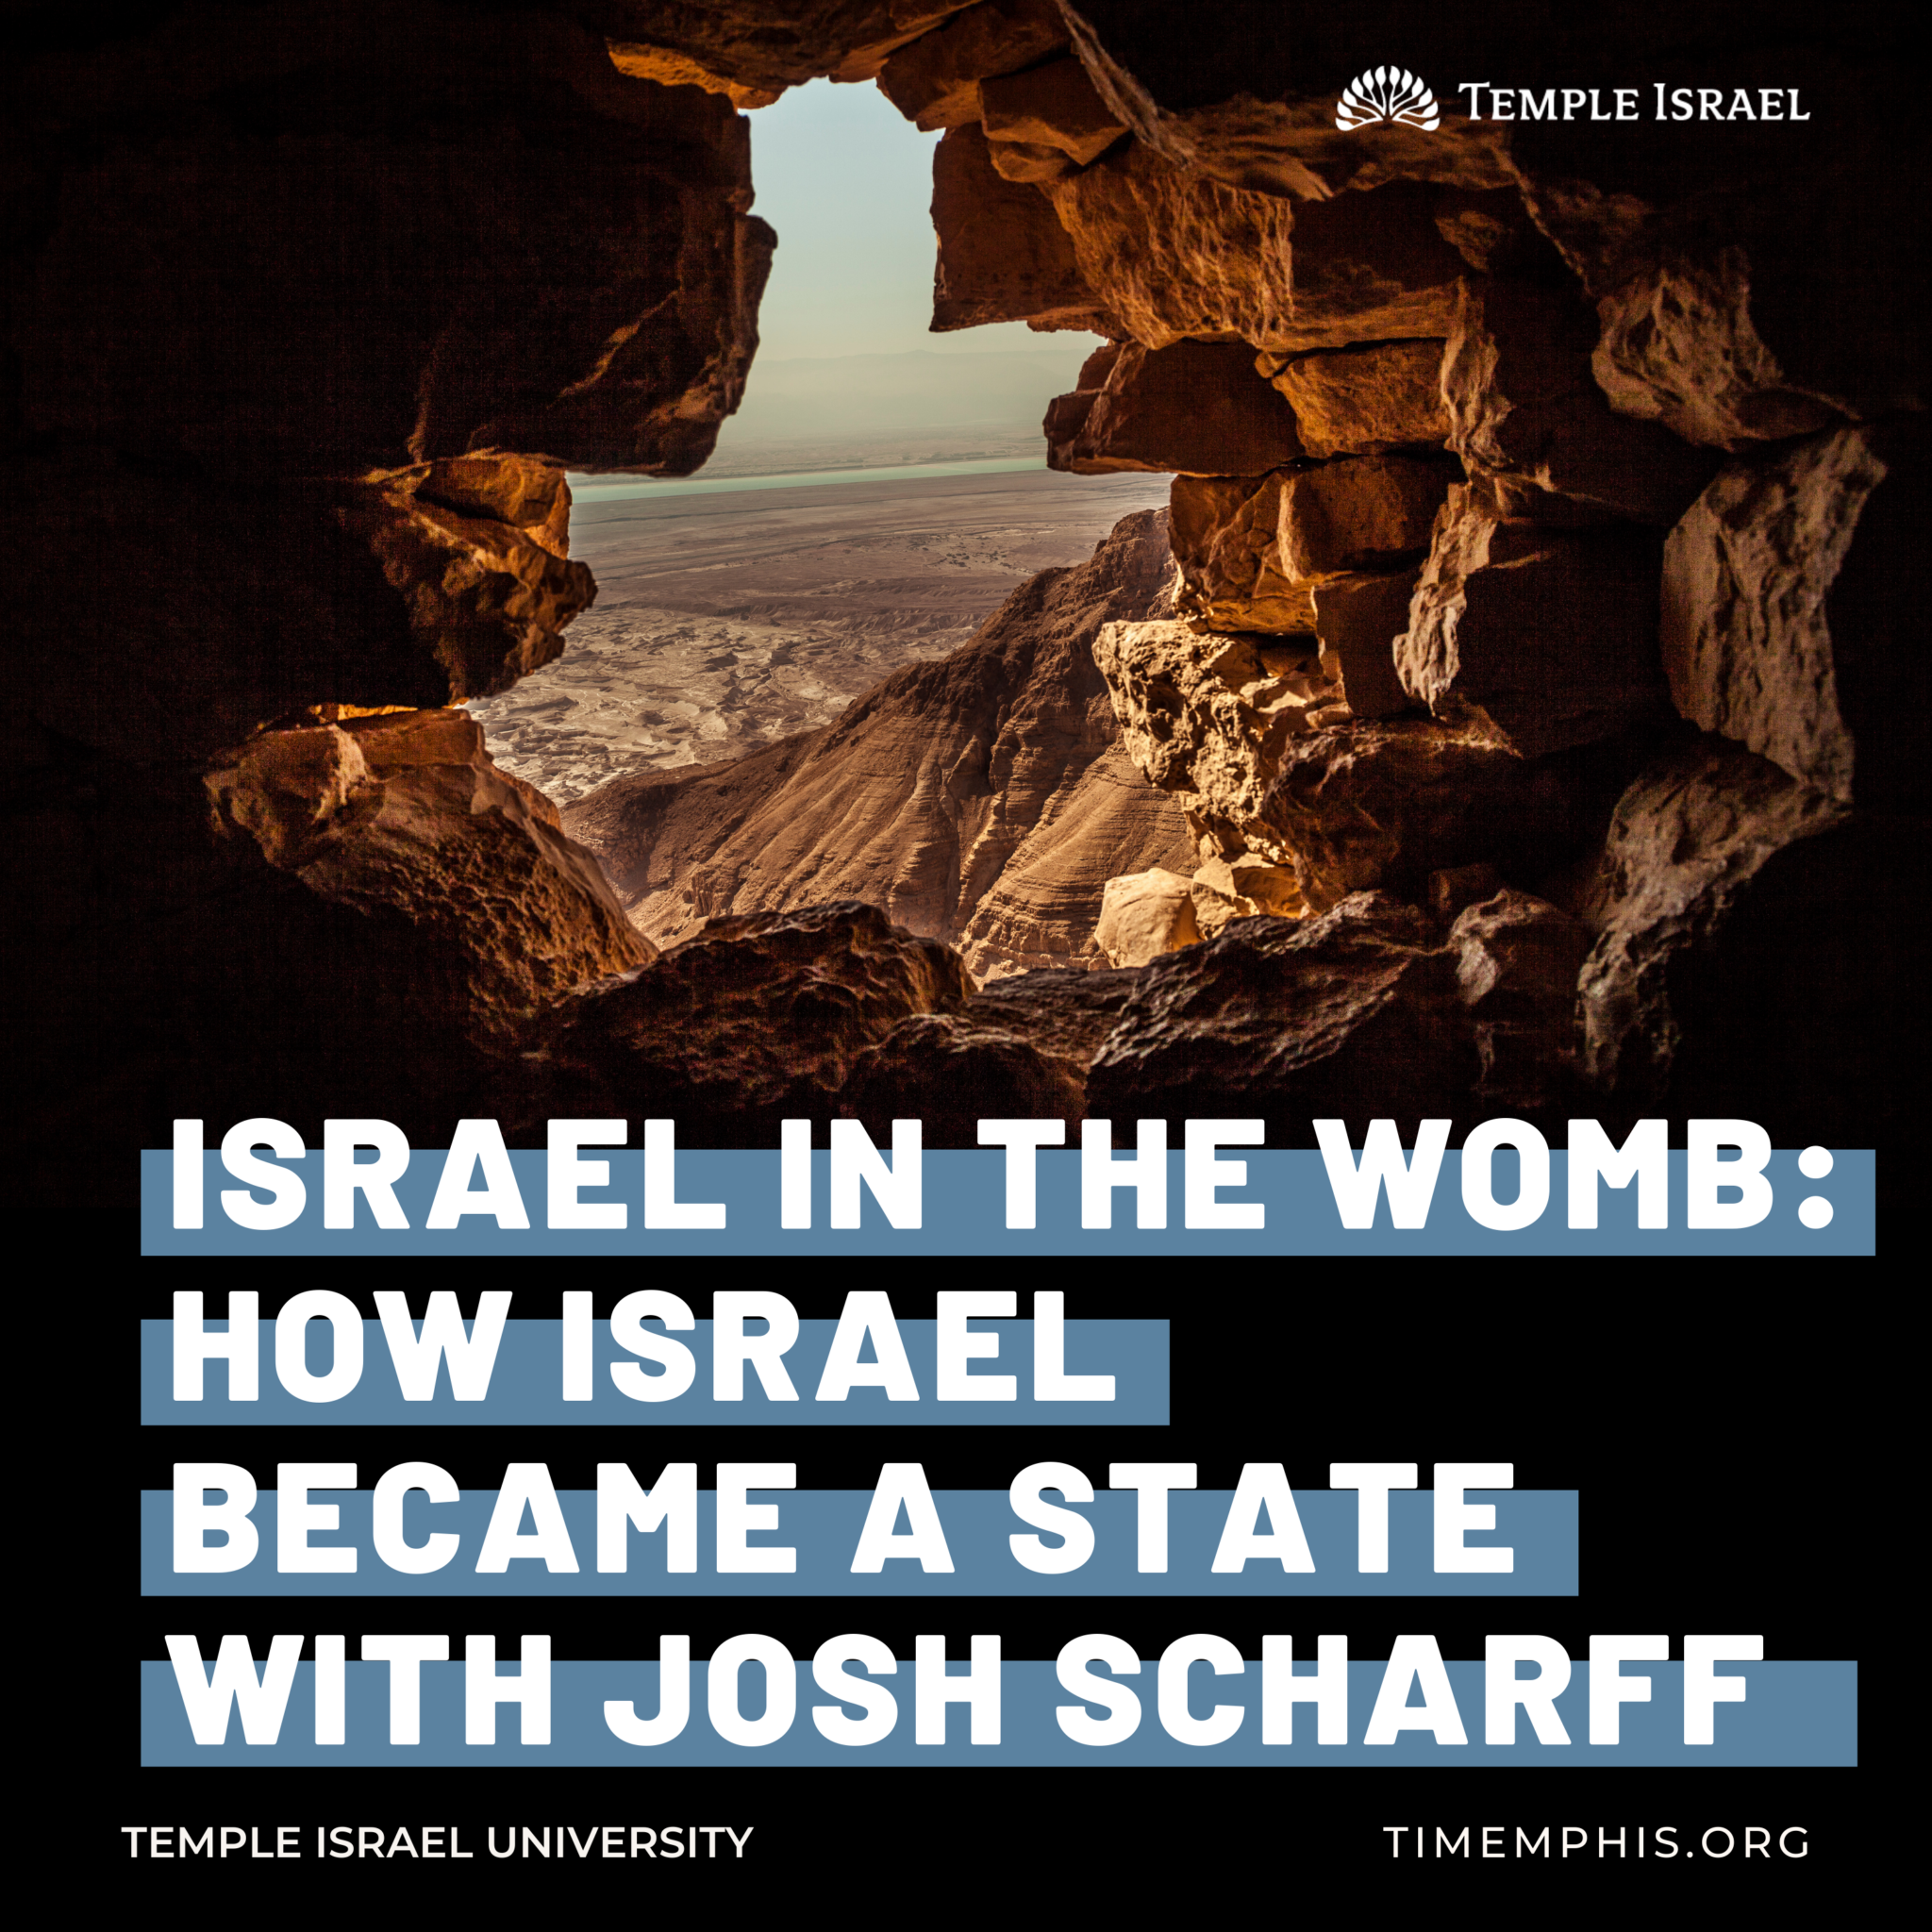 Israel in the womb